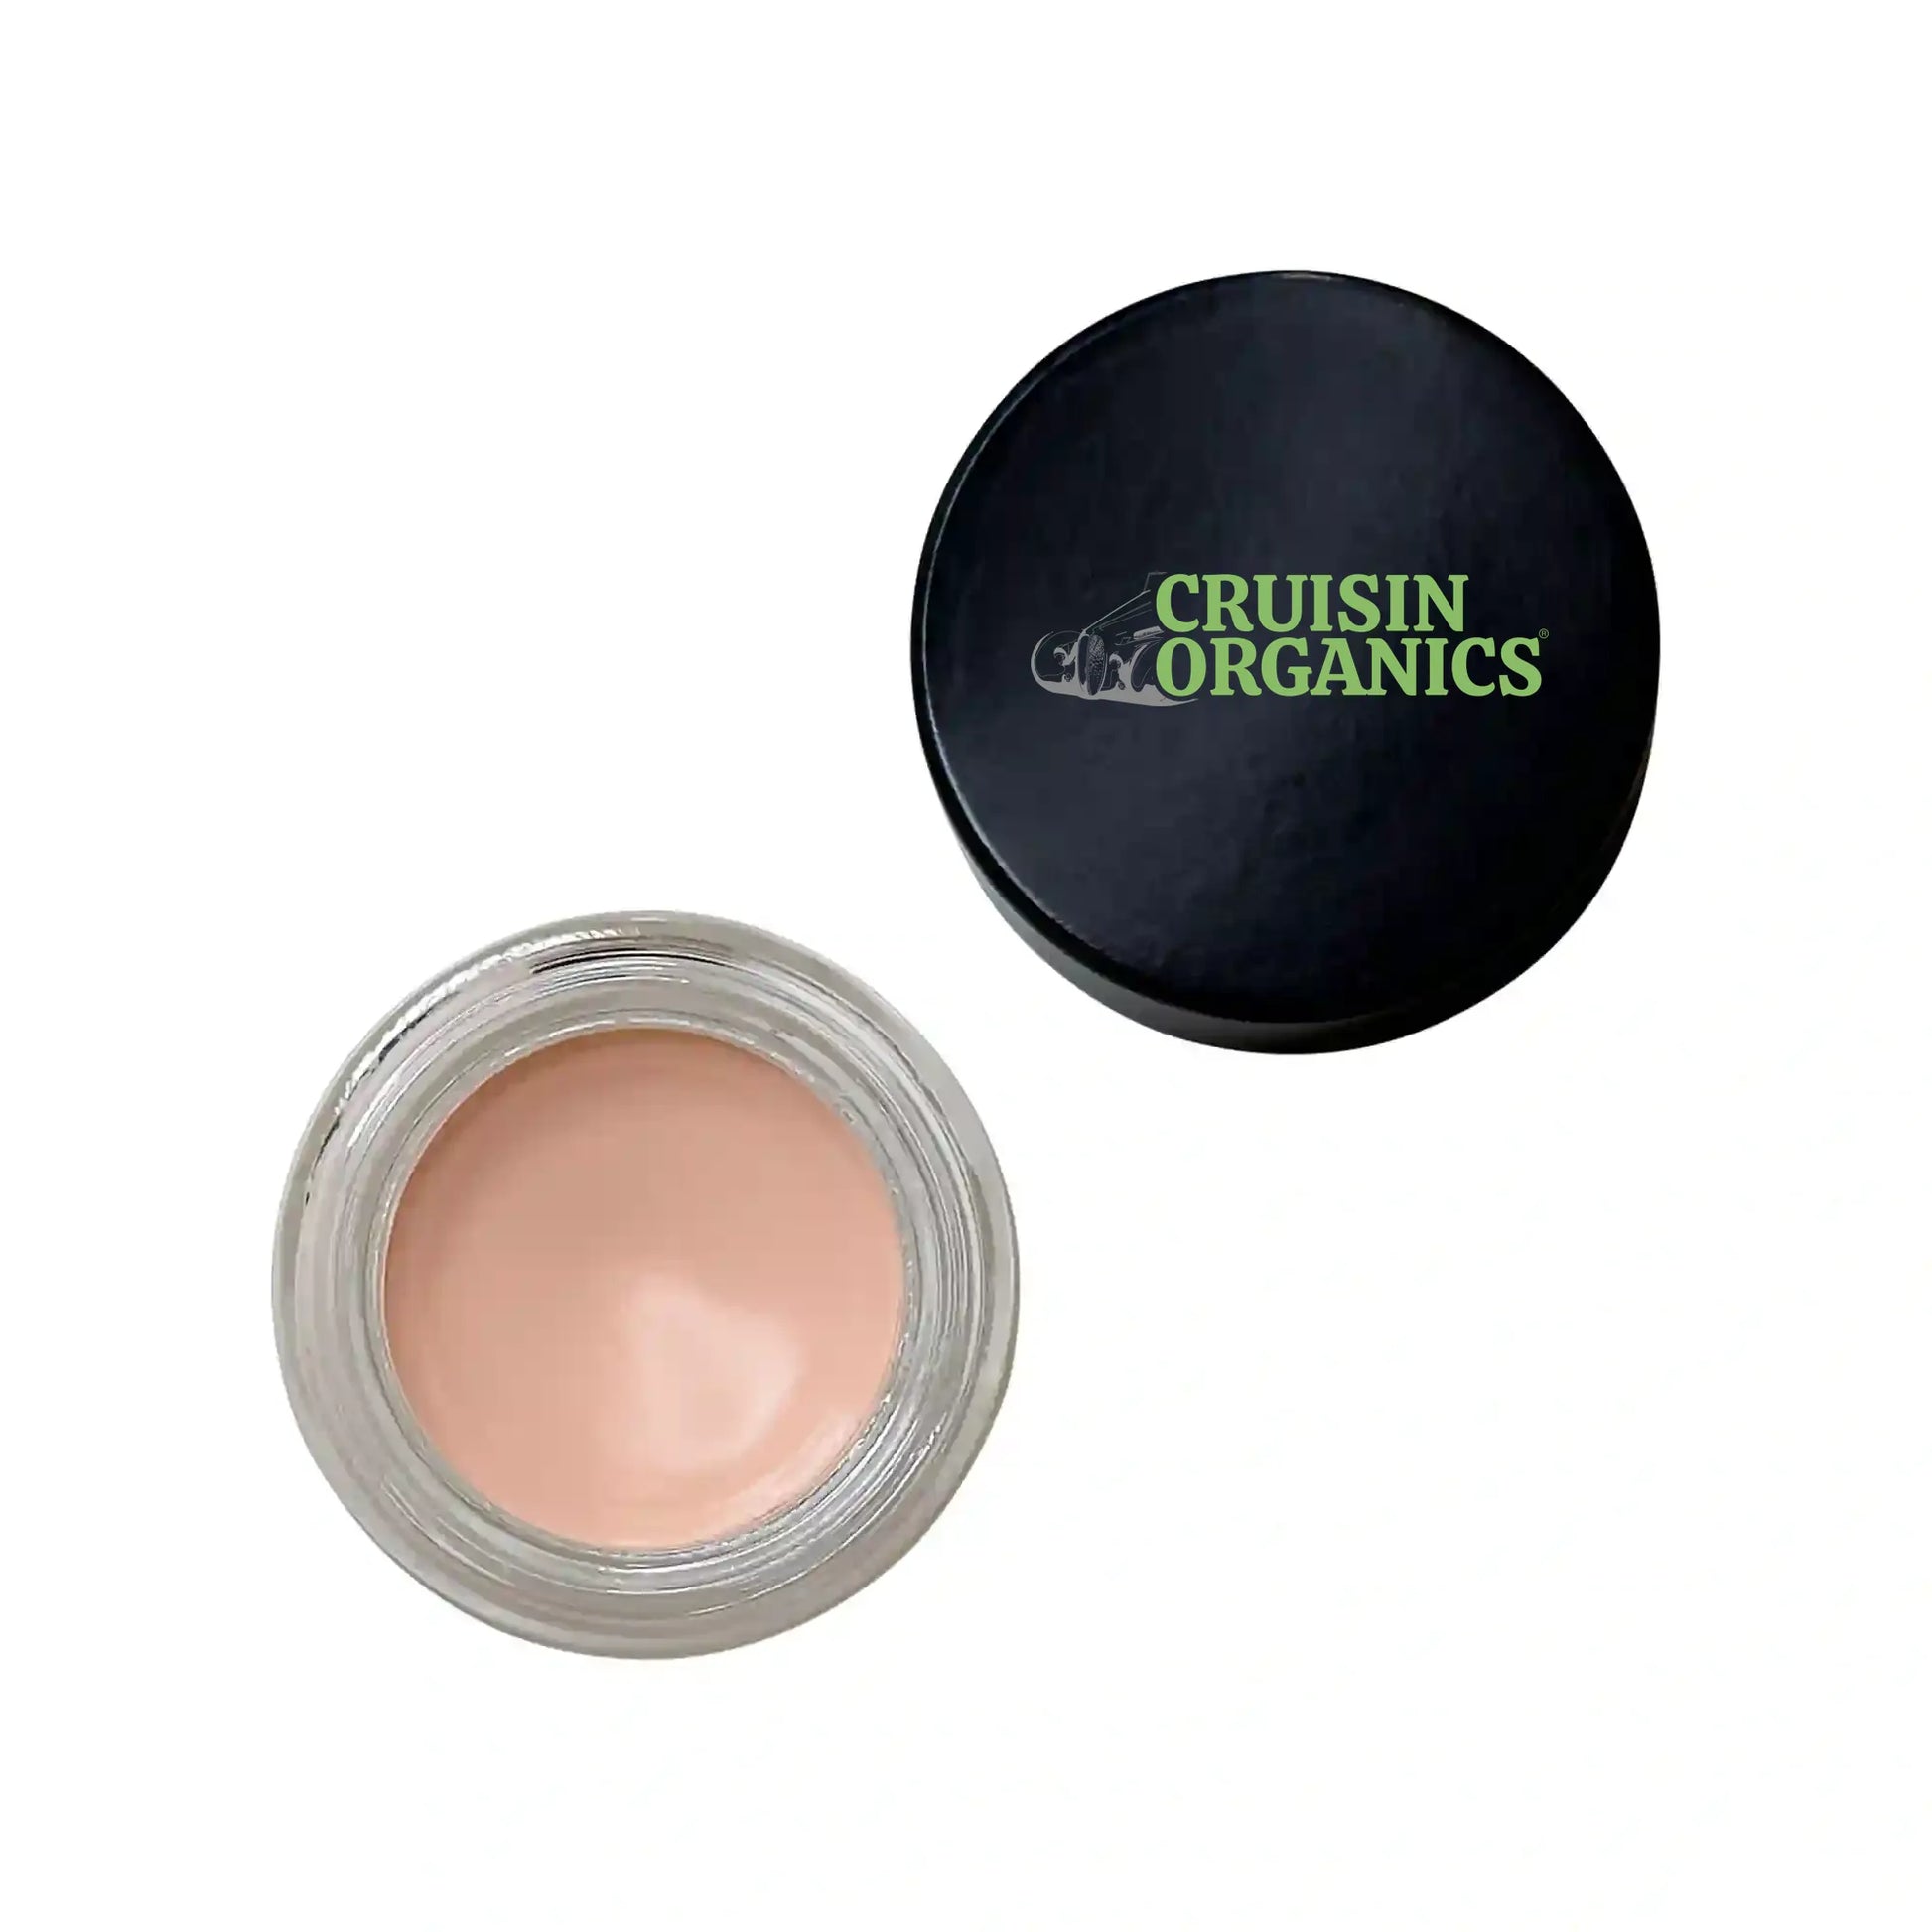 Ensure long-lasting wear for lipsticks and shadows with our Eye & Lip Primer. Conceal any flaws and unevenness on your eyelids using our velvety formula. Our Eye & Lip Primer will keep your lip liners, lipsticks, eyeshadows, and glitters looking fresh all day without the worry of creases. Say goodbye to creasing with this sheer and seamless primer for effortless application of color on your lids!